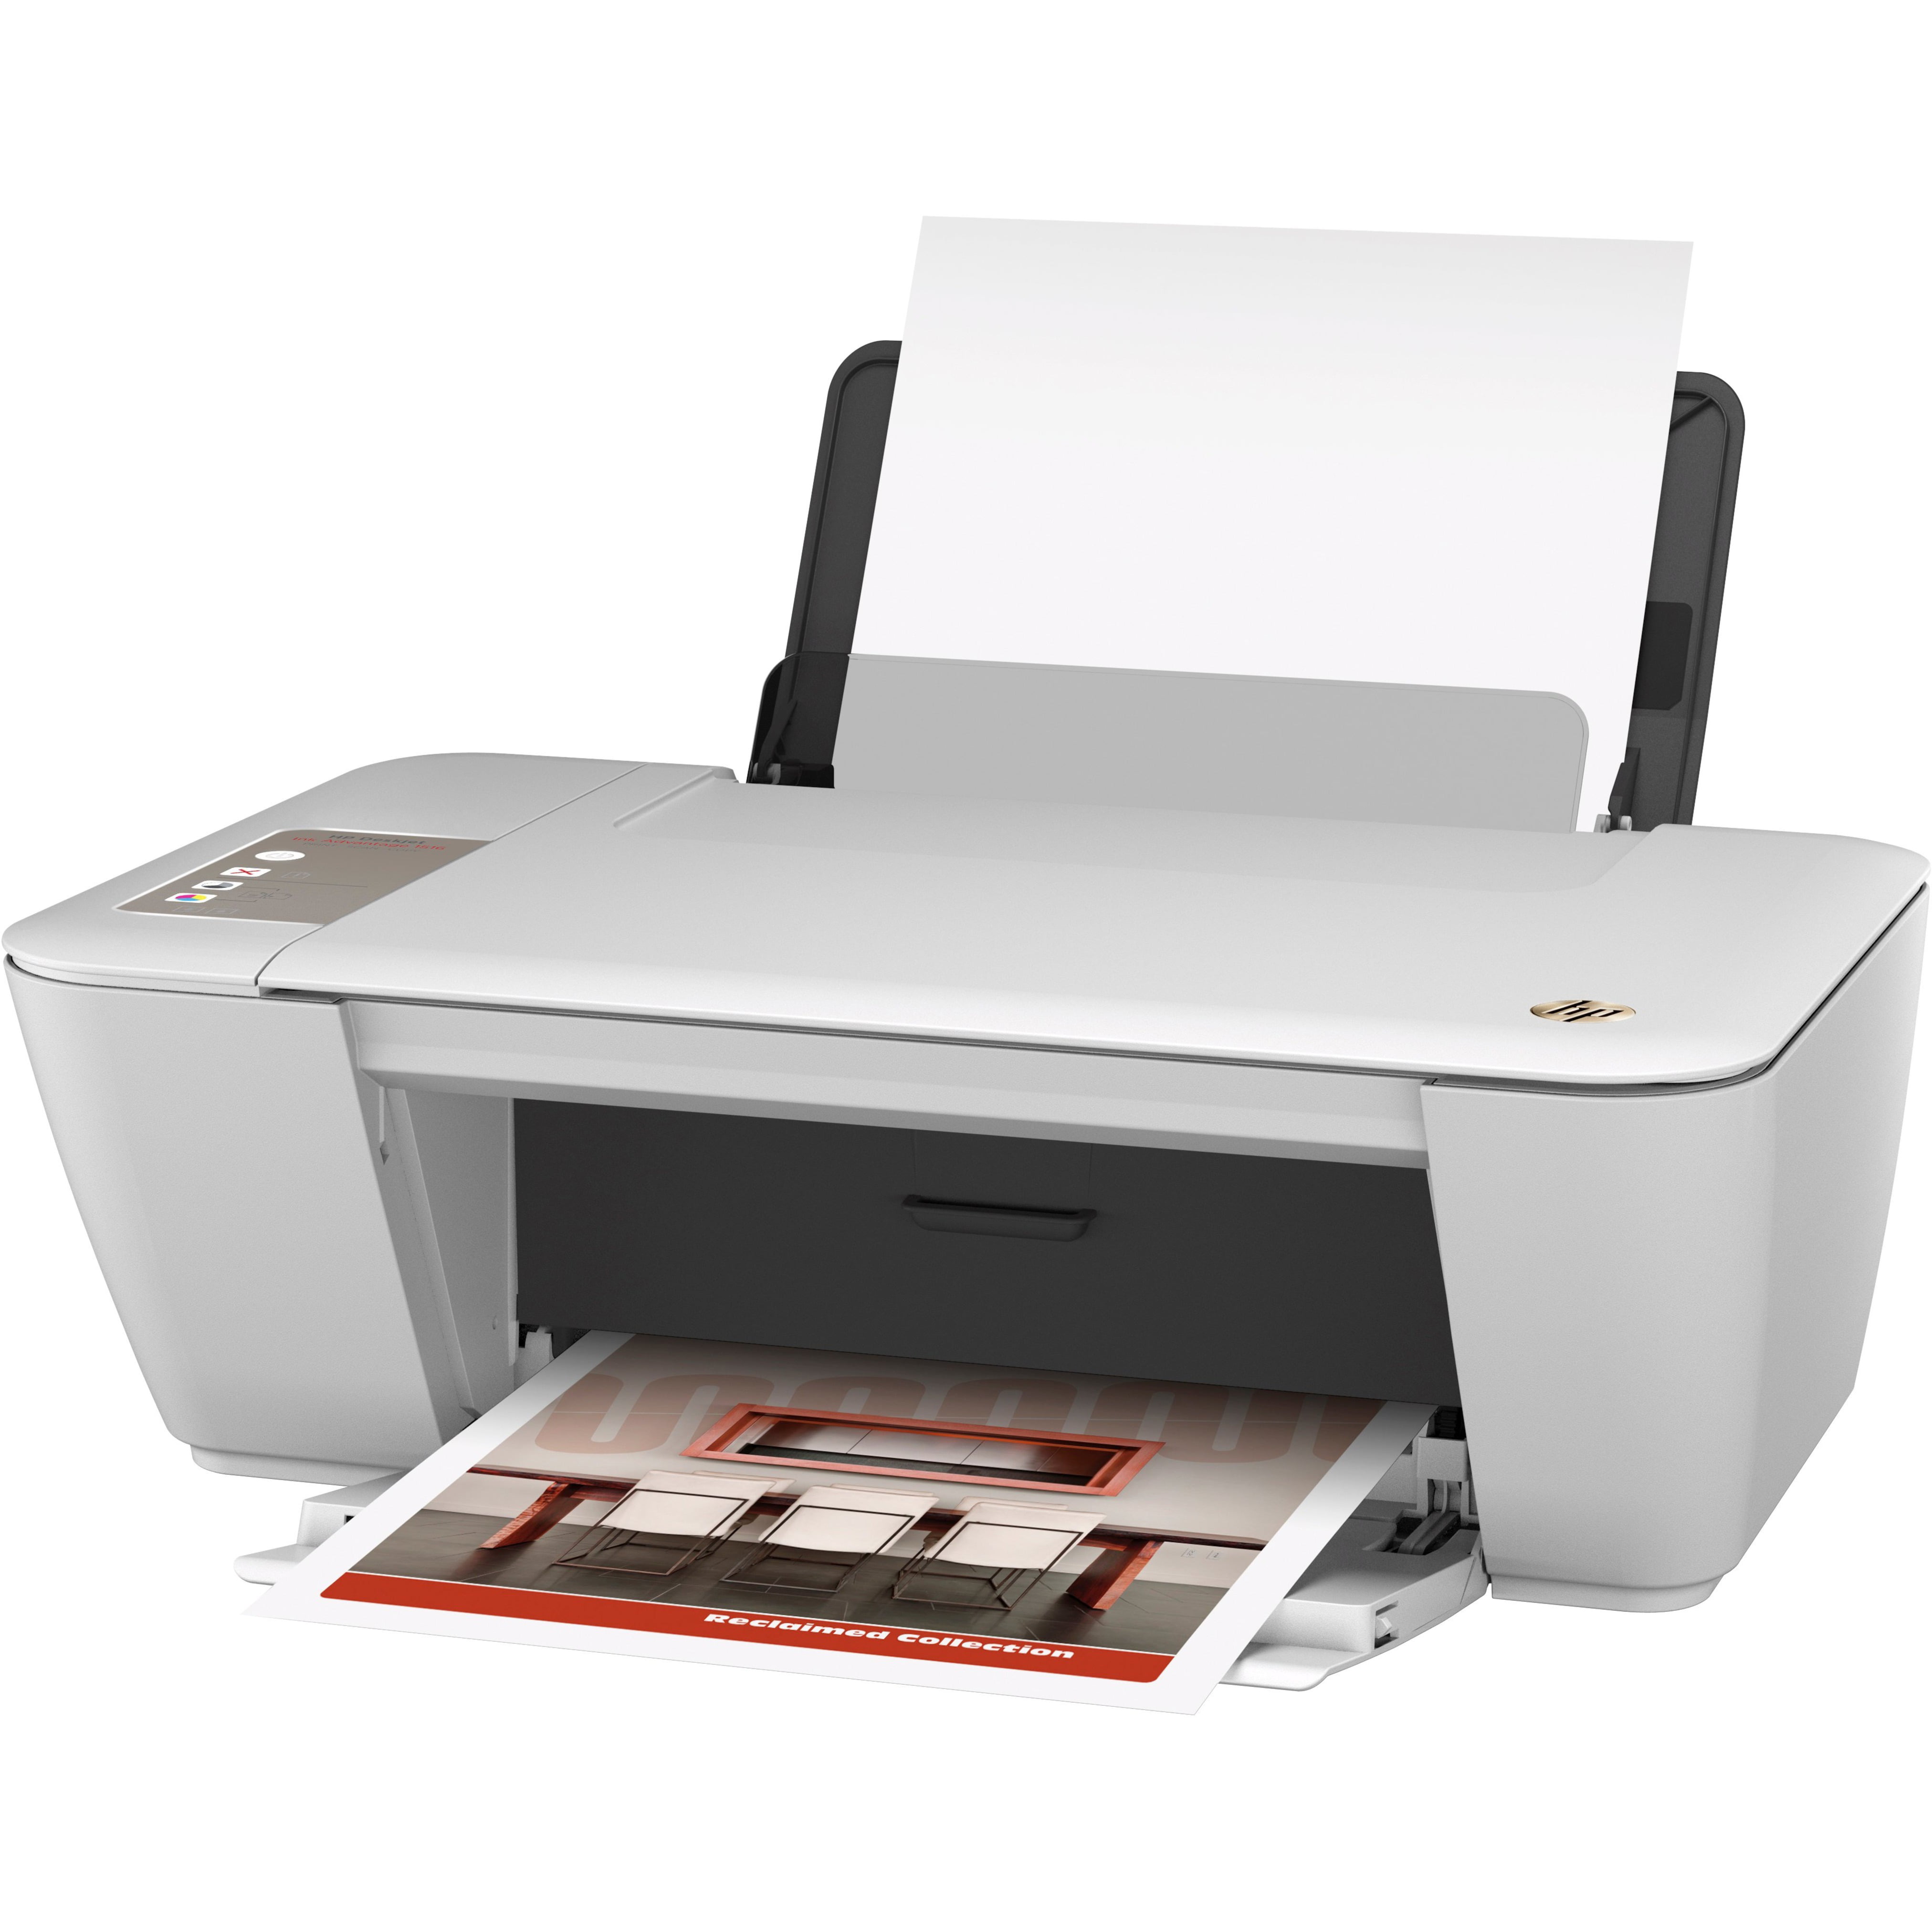 HP Smart Tank 5102 Wireless All-in-One Color Home Inkjet Tank Printer w/up  to 2 Yrs of Ink Incl 